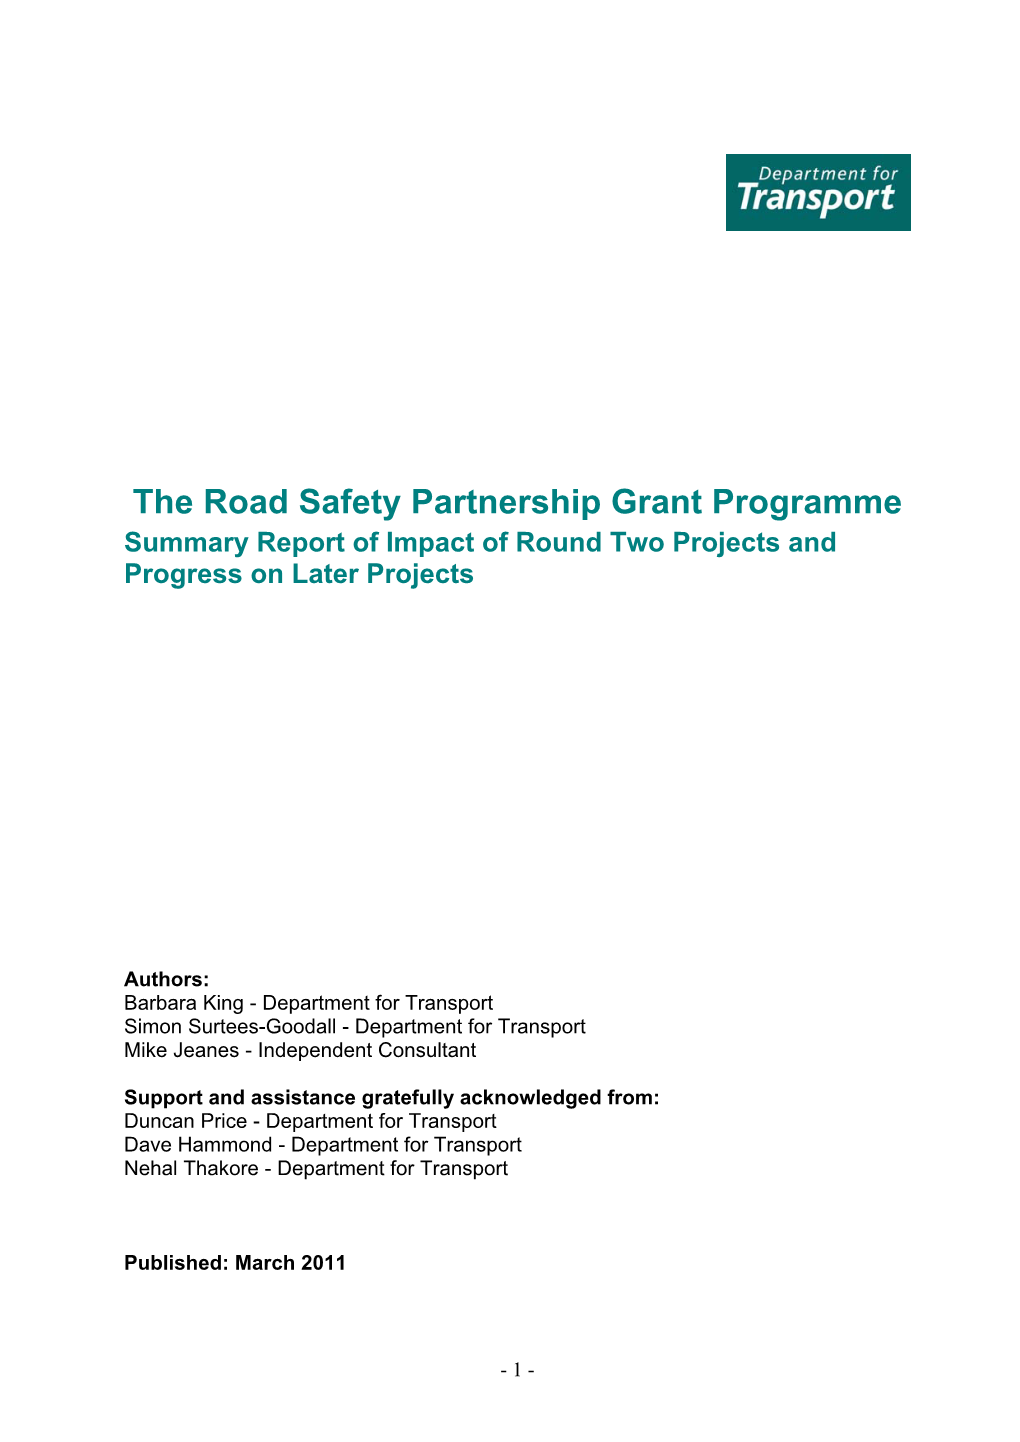 The Road Safety Partnership Grant Programme Summary Report of Impact of Round Two Projects and Progress on Later Projects